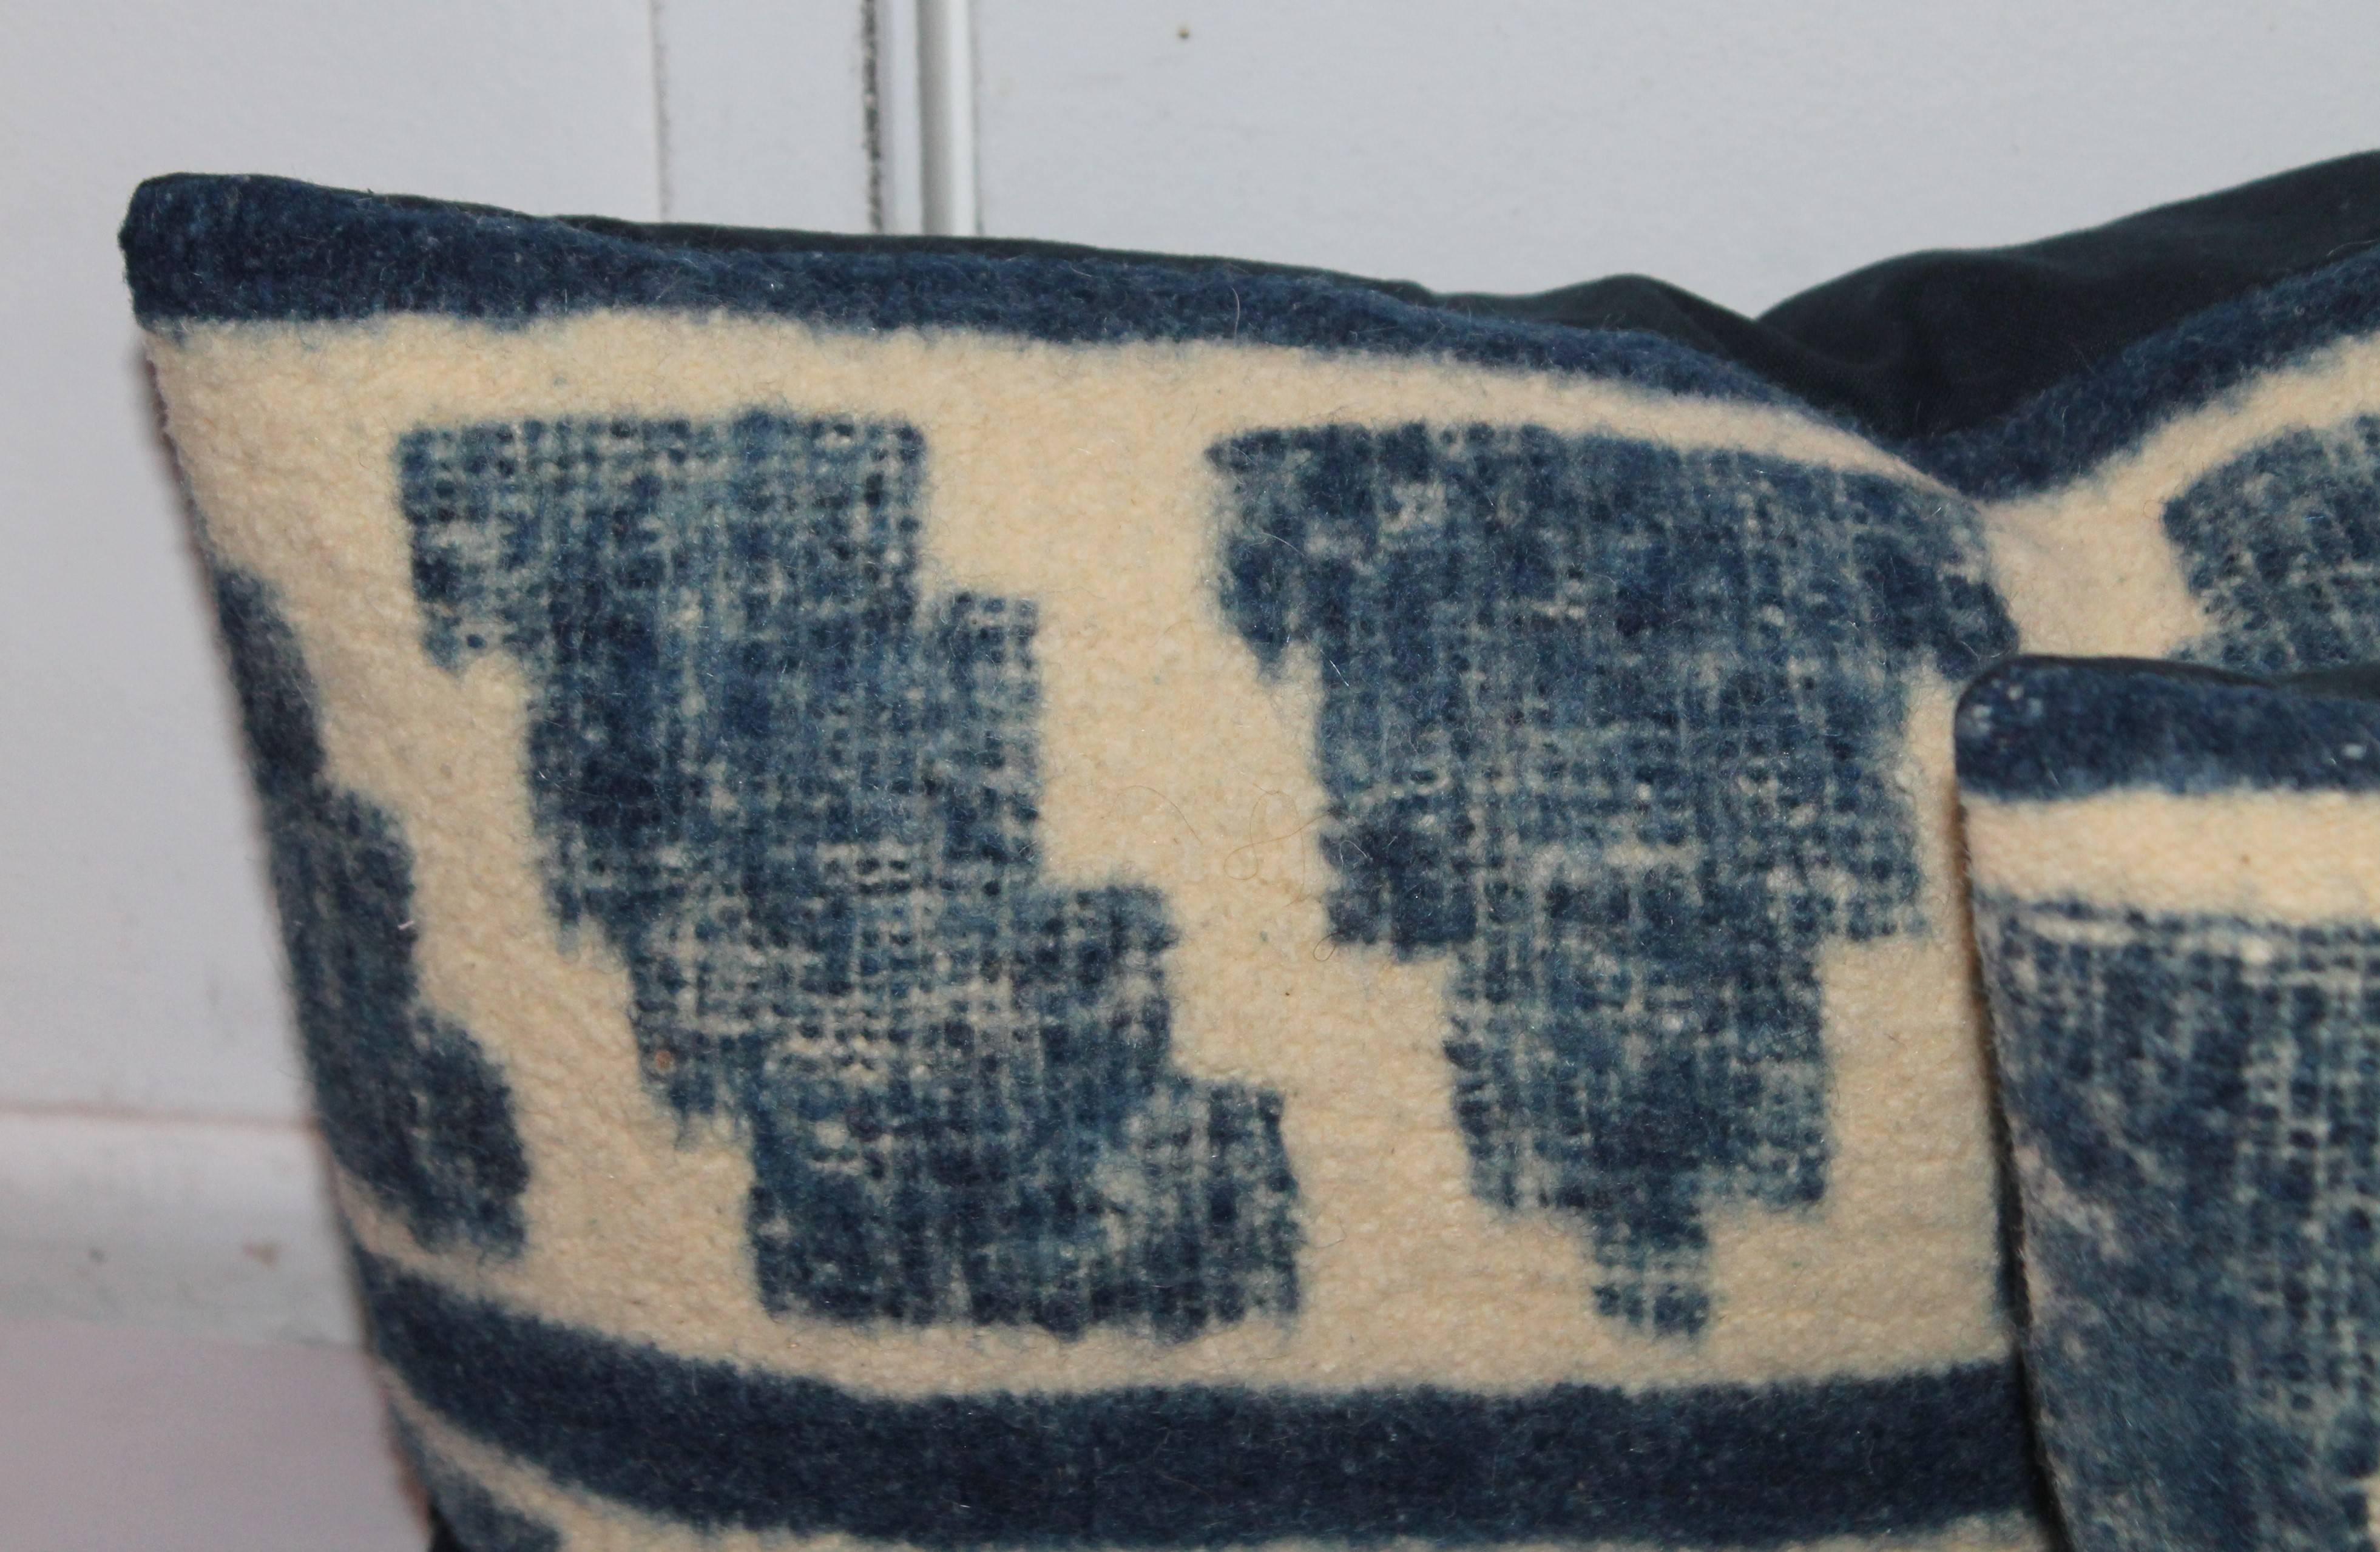 These handwoven Mexican or Peruvian indigo and cream bolster pillows are sold as a match pair. The condition are very good with blue cotton linen backing.